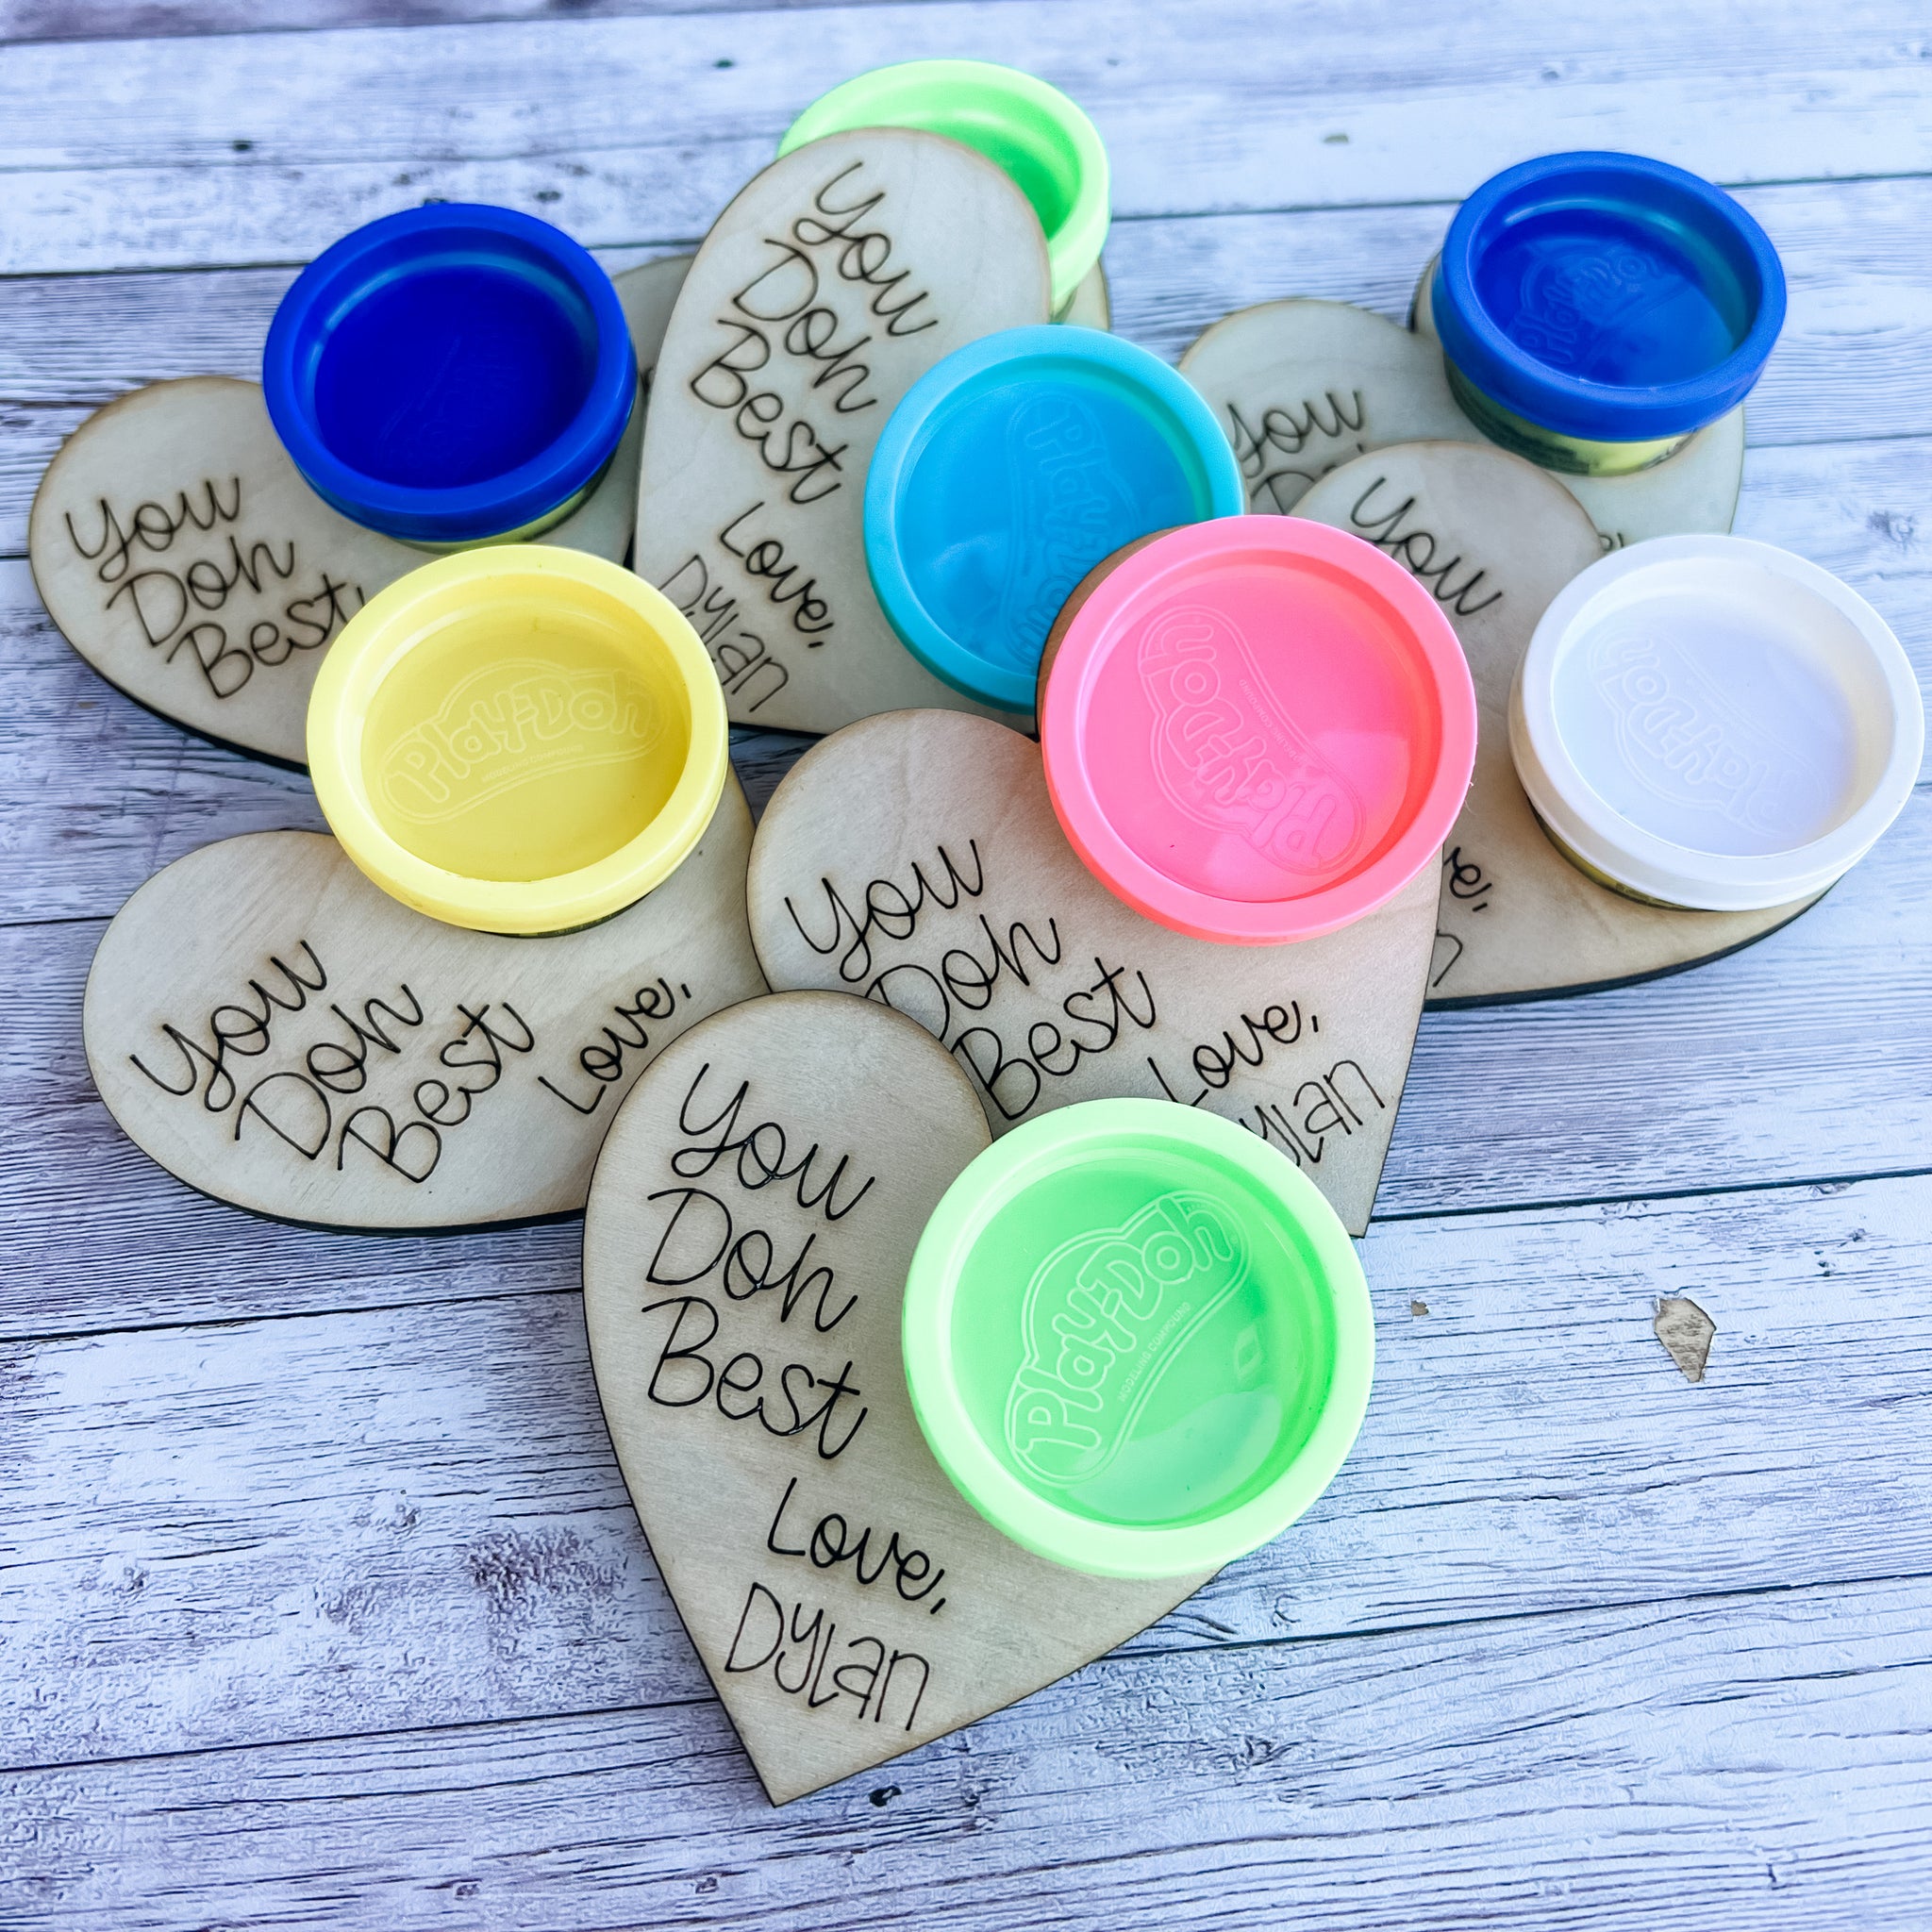 Play-Doh Valentine Valentine’s Day, birthday party favors, Easter baskets